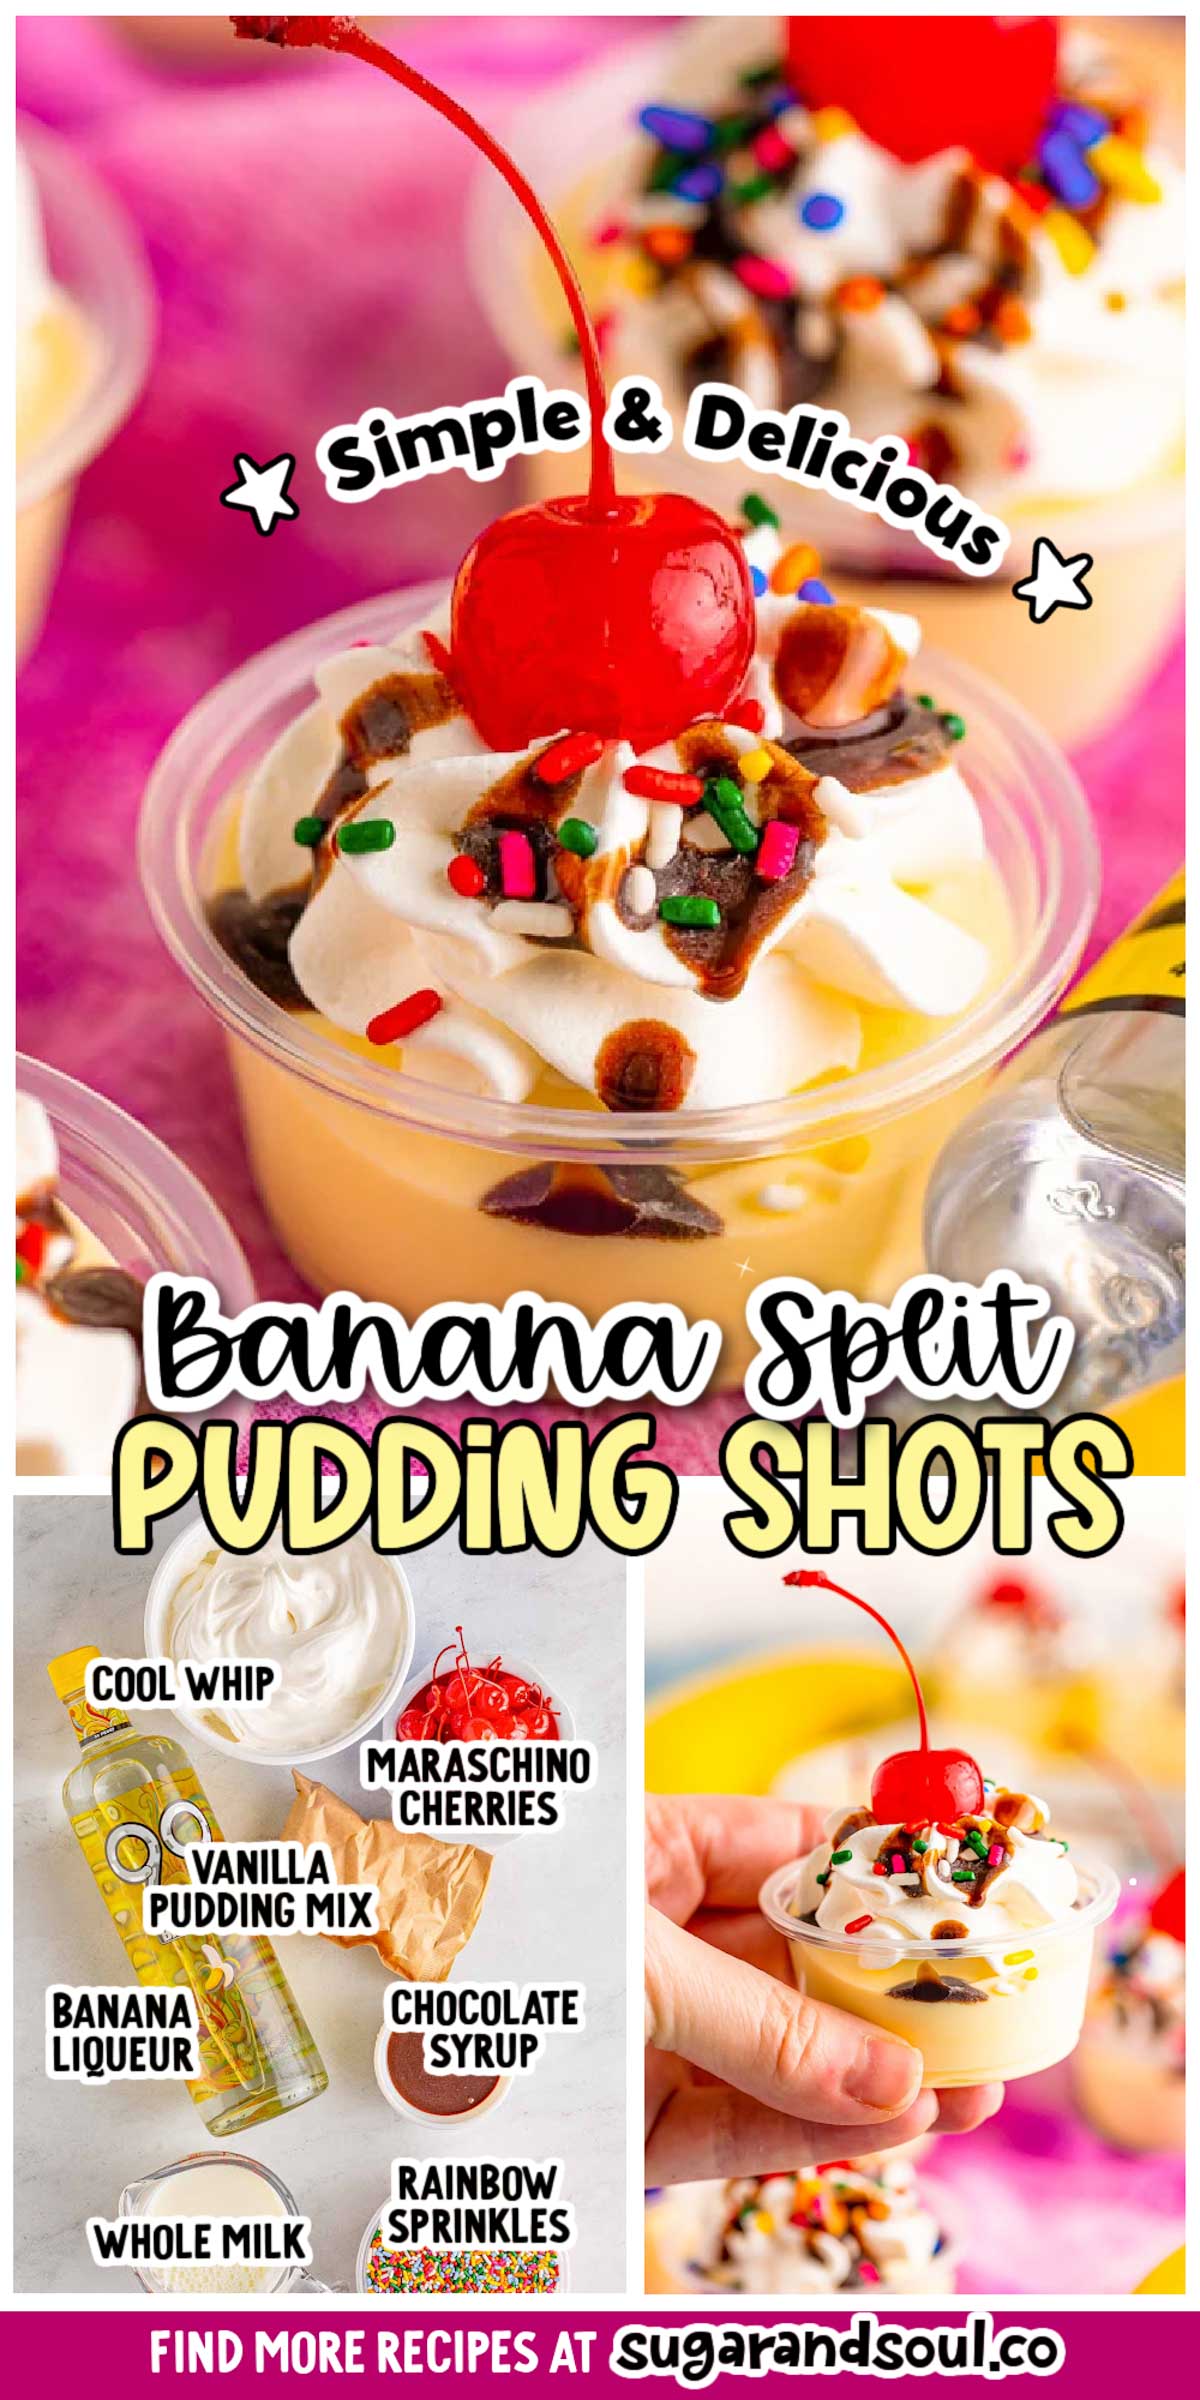 Banana Split Pudding Shots are a fun dessert shot that's made with only 4 ingredients and topped with your favorite ice cream toppings! Only 10 minutes of hands-on prep time is needed! via @sugarandsoulco